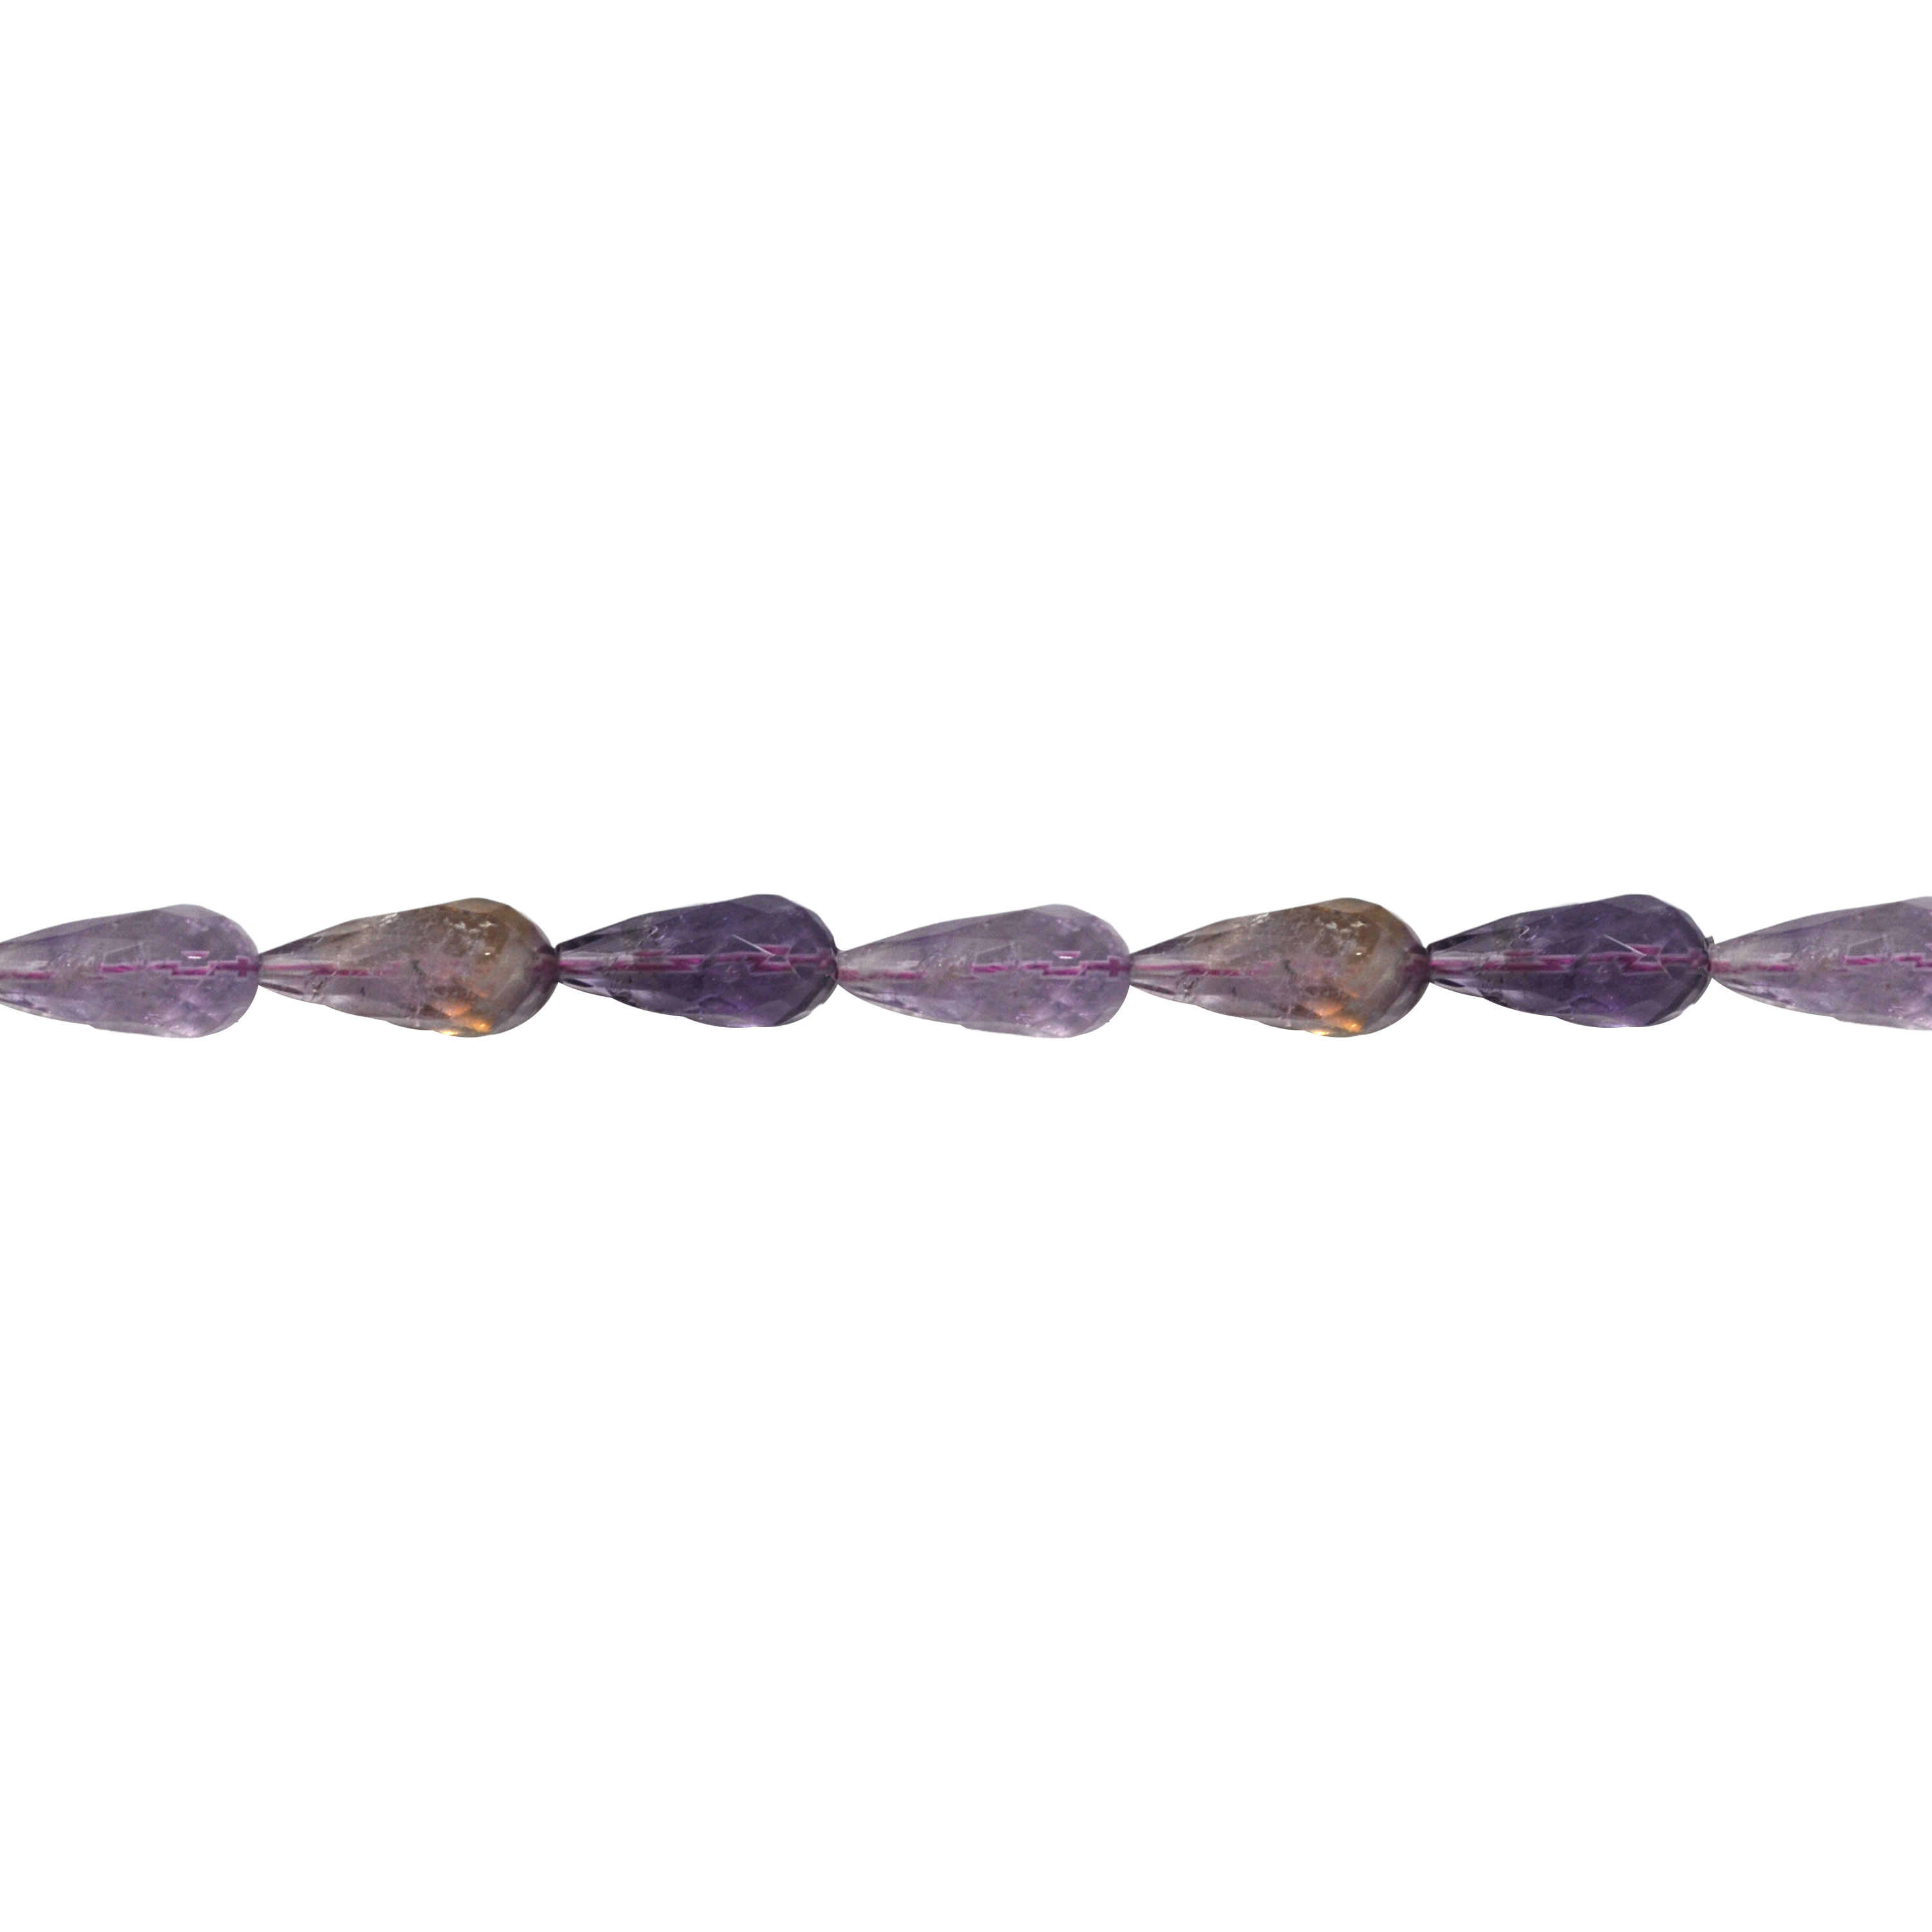 12mm x 26mm Amethyst Faceted Drop Beads